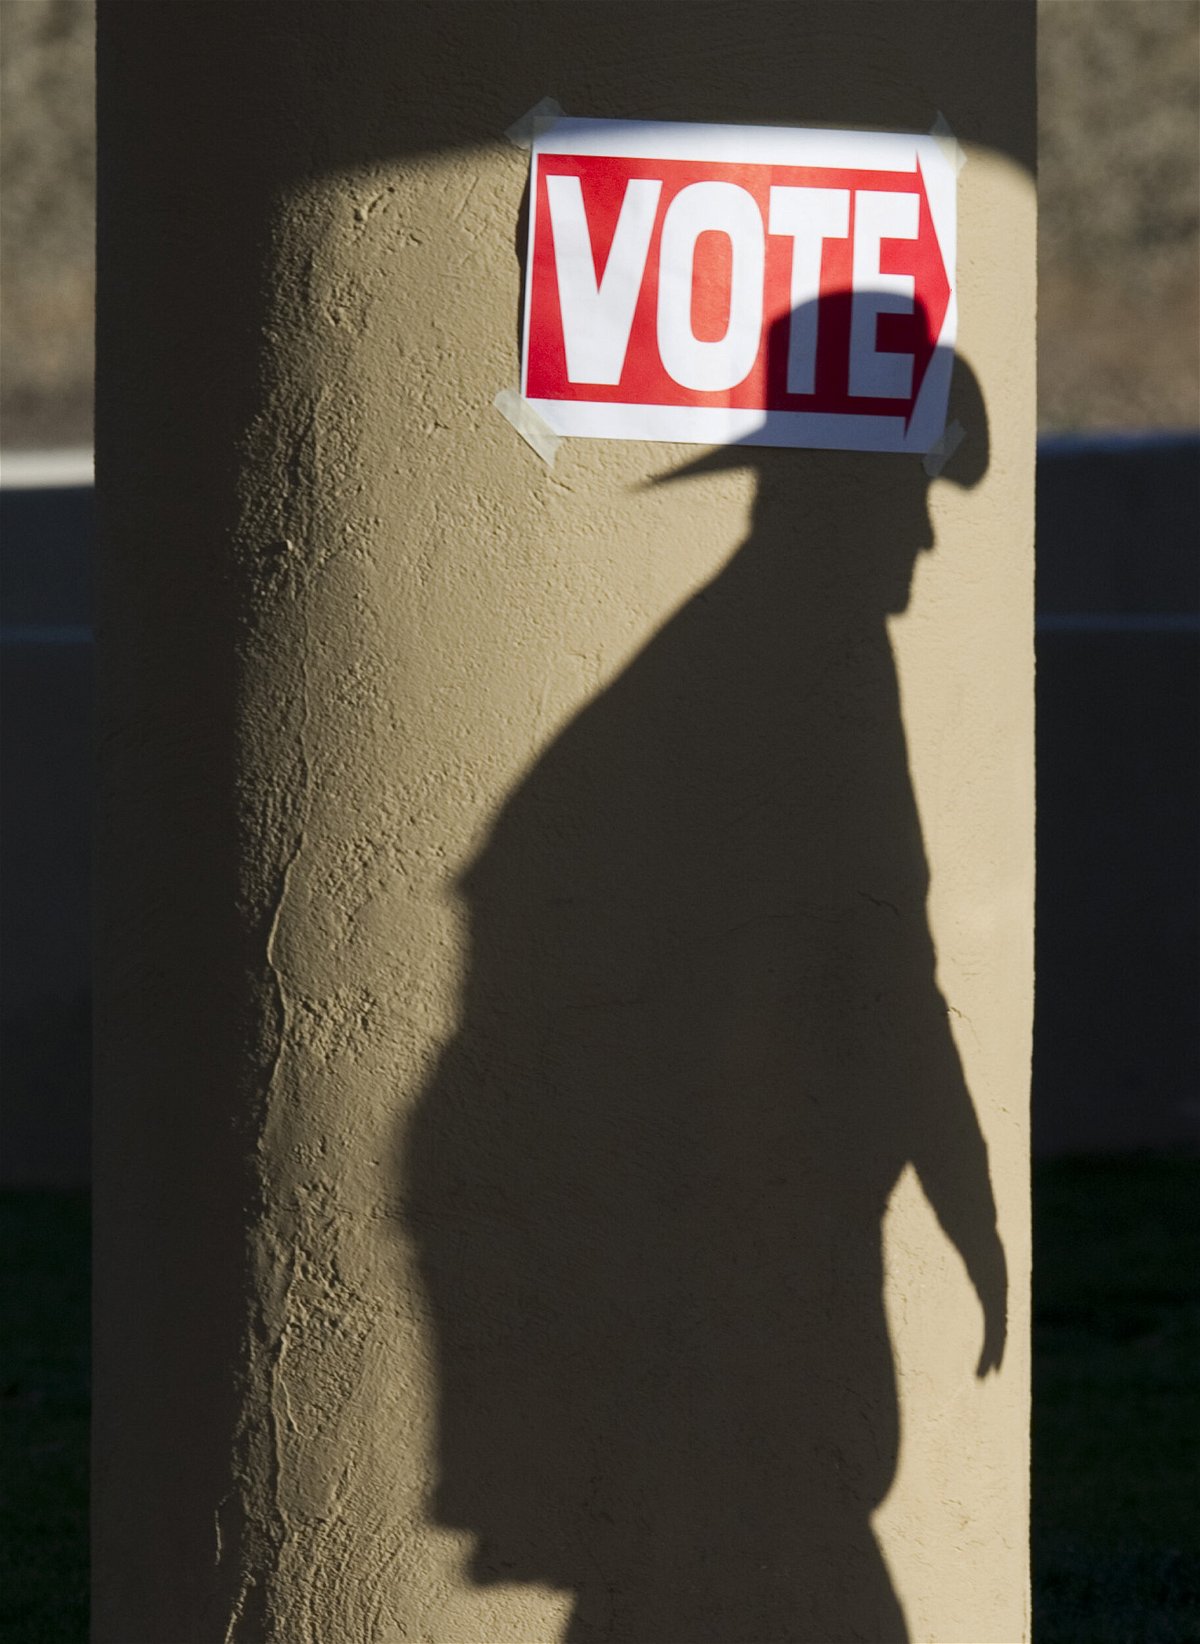 <i>DON EMMERT/AFP/AFP via Getty Images</i><br/>A shadow of a man wearing a cowboy hat falls on a pillar as he enters the polling place at Wickenburg Community Center on February 28